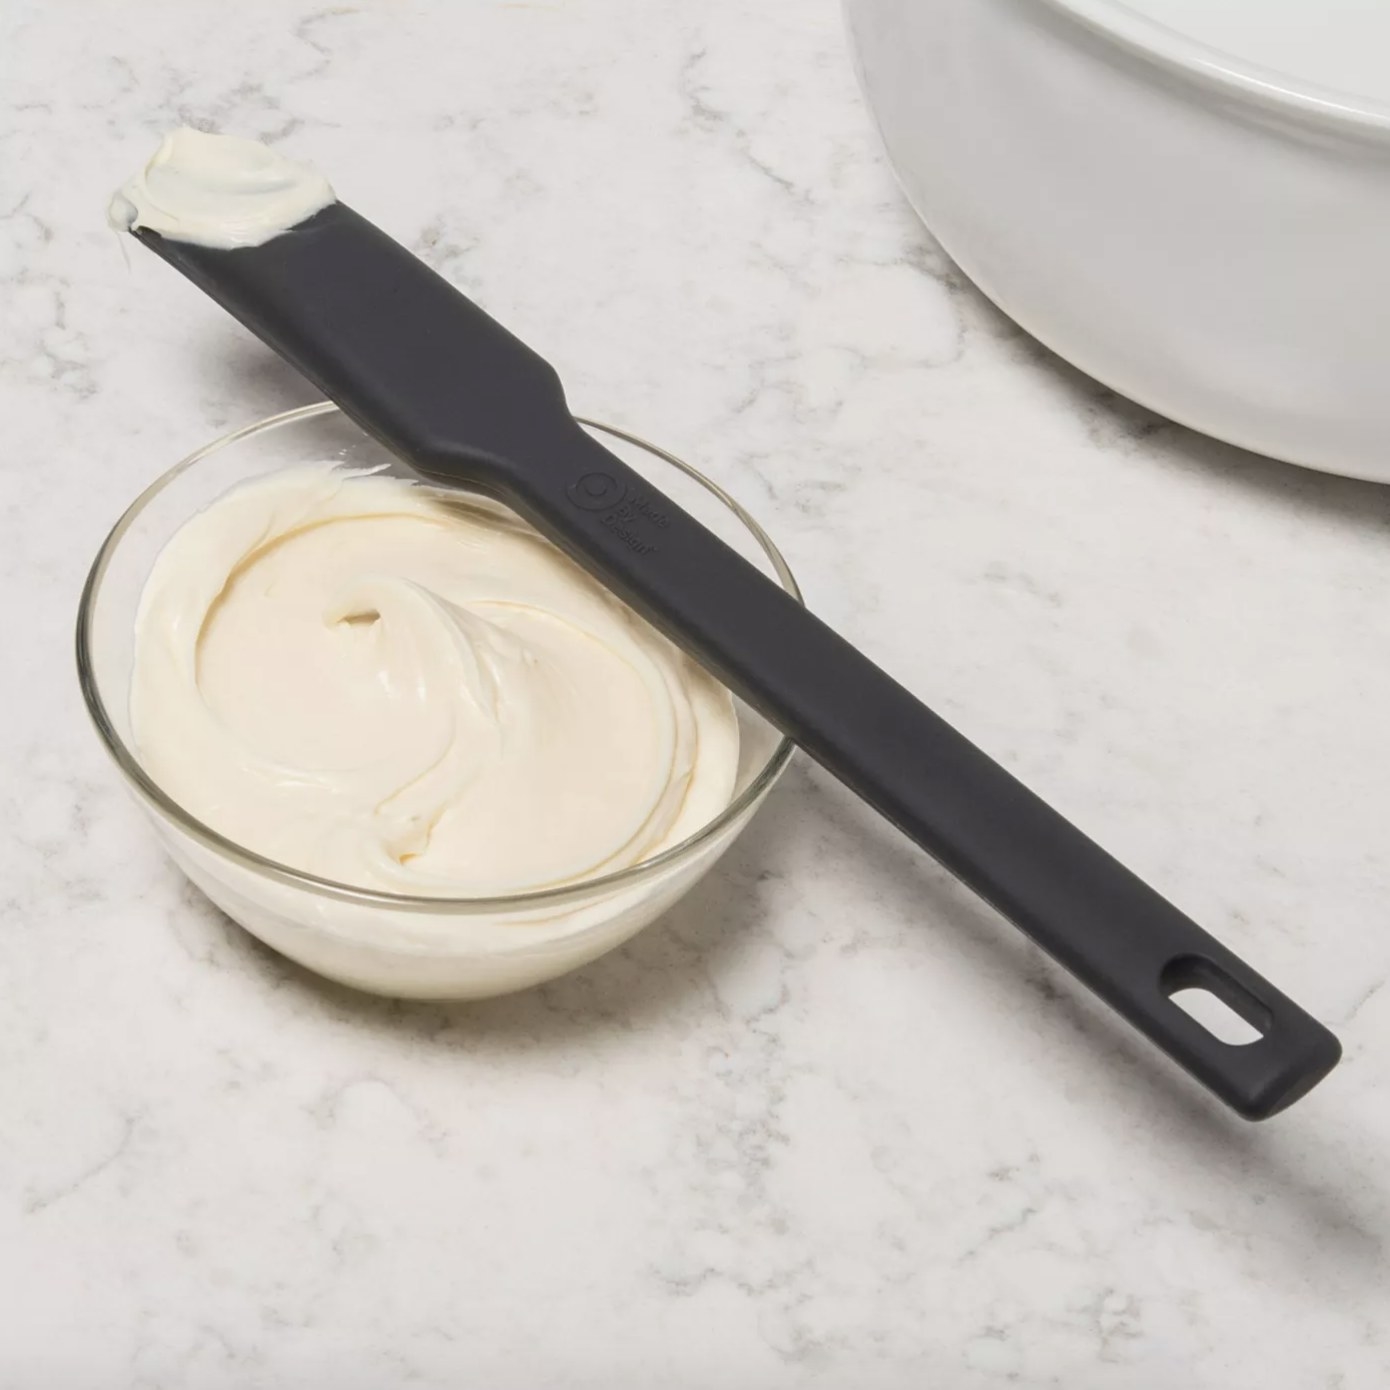 The all black spatula is resting on top of a small glass dish of white cream texture with a bit on the edge